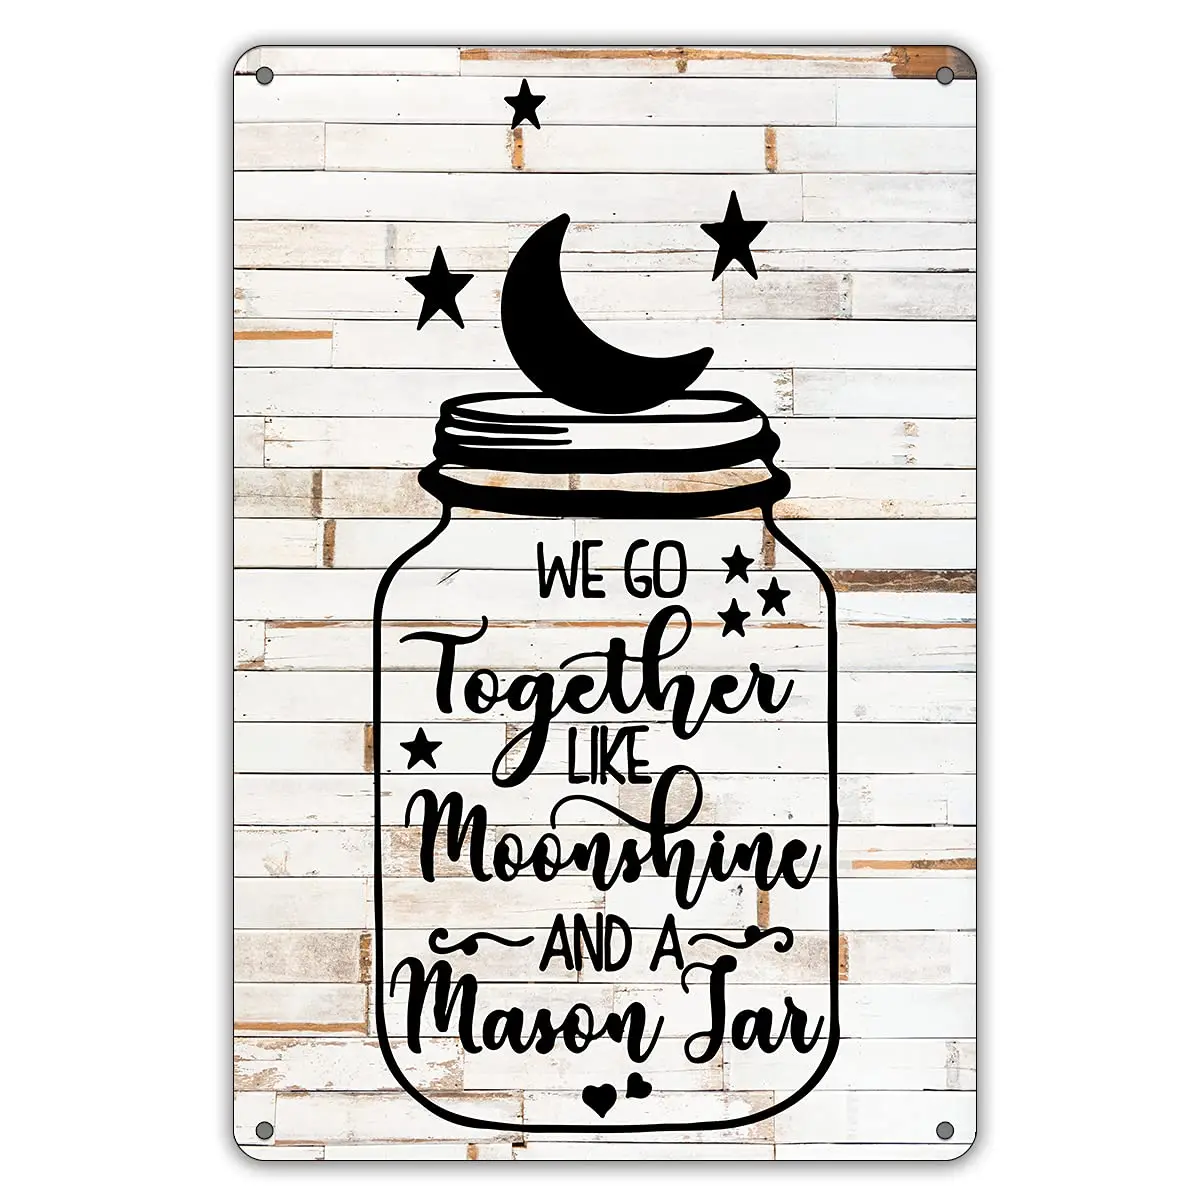 

We Go Together Like Moonshine in a Mason Jar Metal Tin Sign Wall Decor Rustic Farmhouse Sign for Home Dining Room